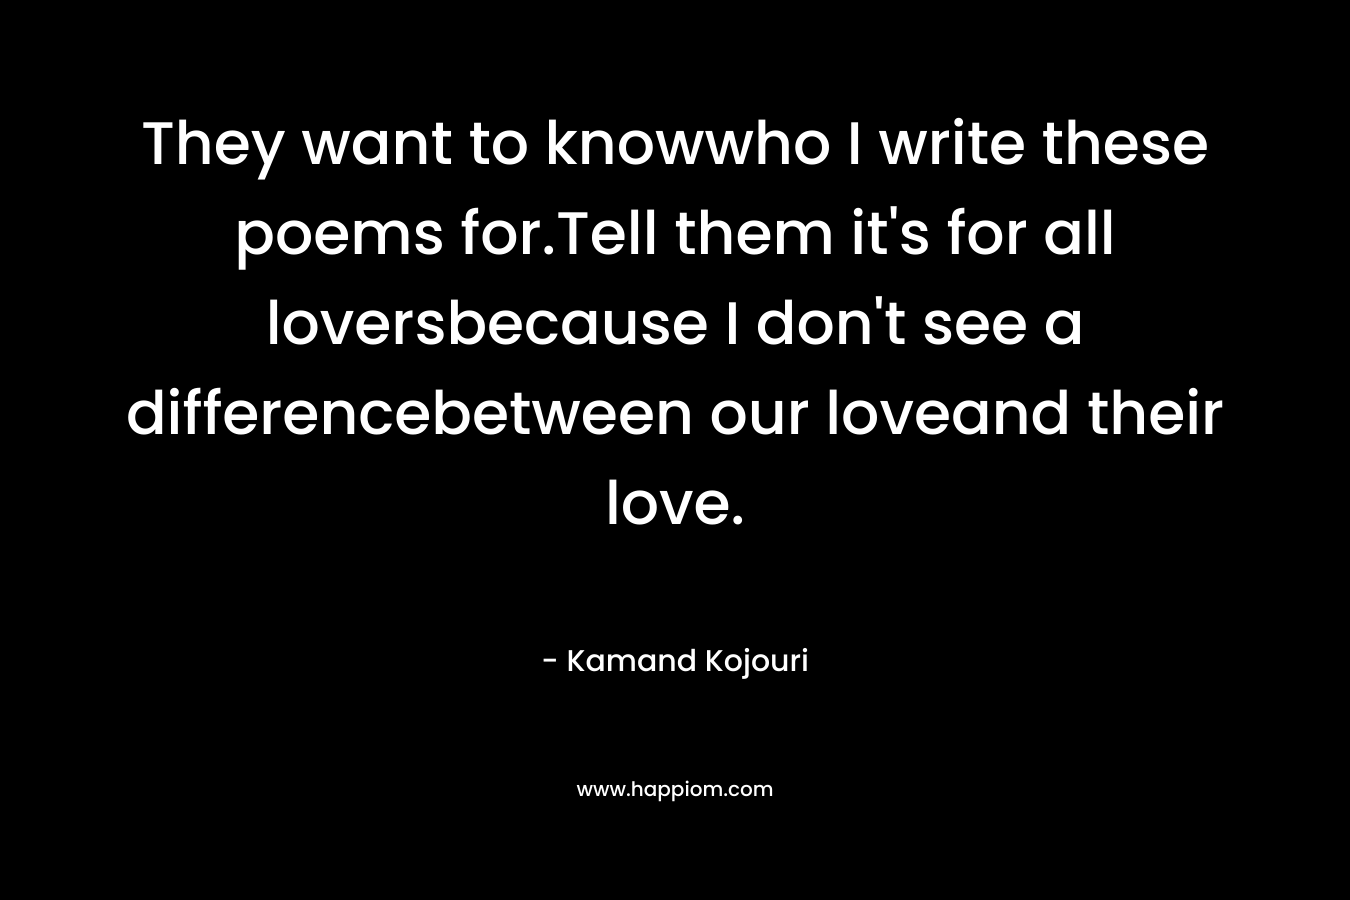 They want to knowwho I write these poems for.Tell them it’s for all loversbecause I don’t see a differencebetween our loveand their love. – Kamand Kojouri